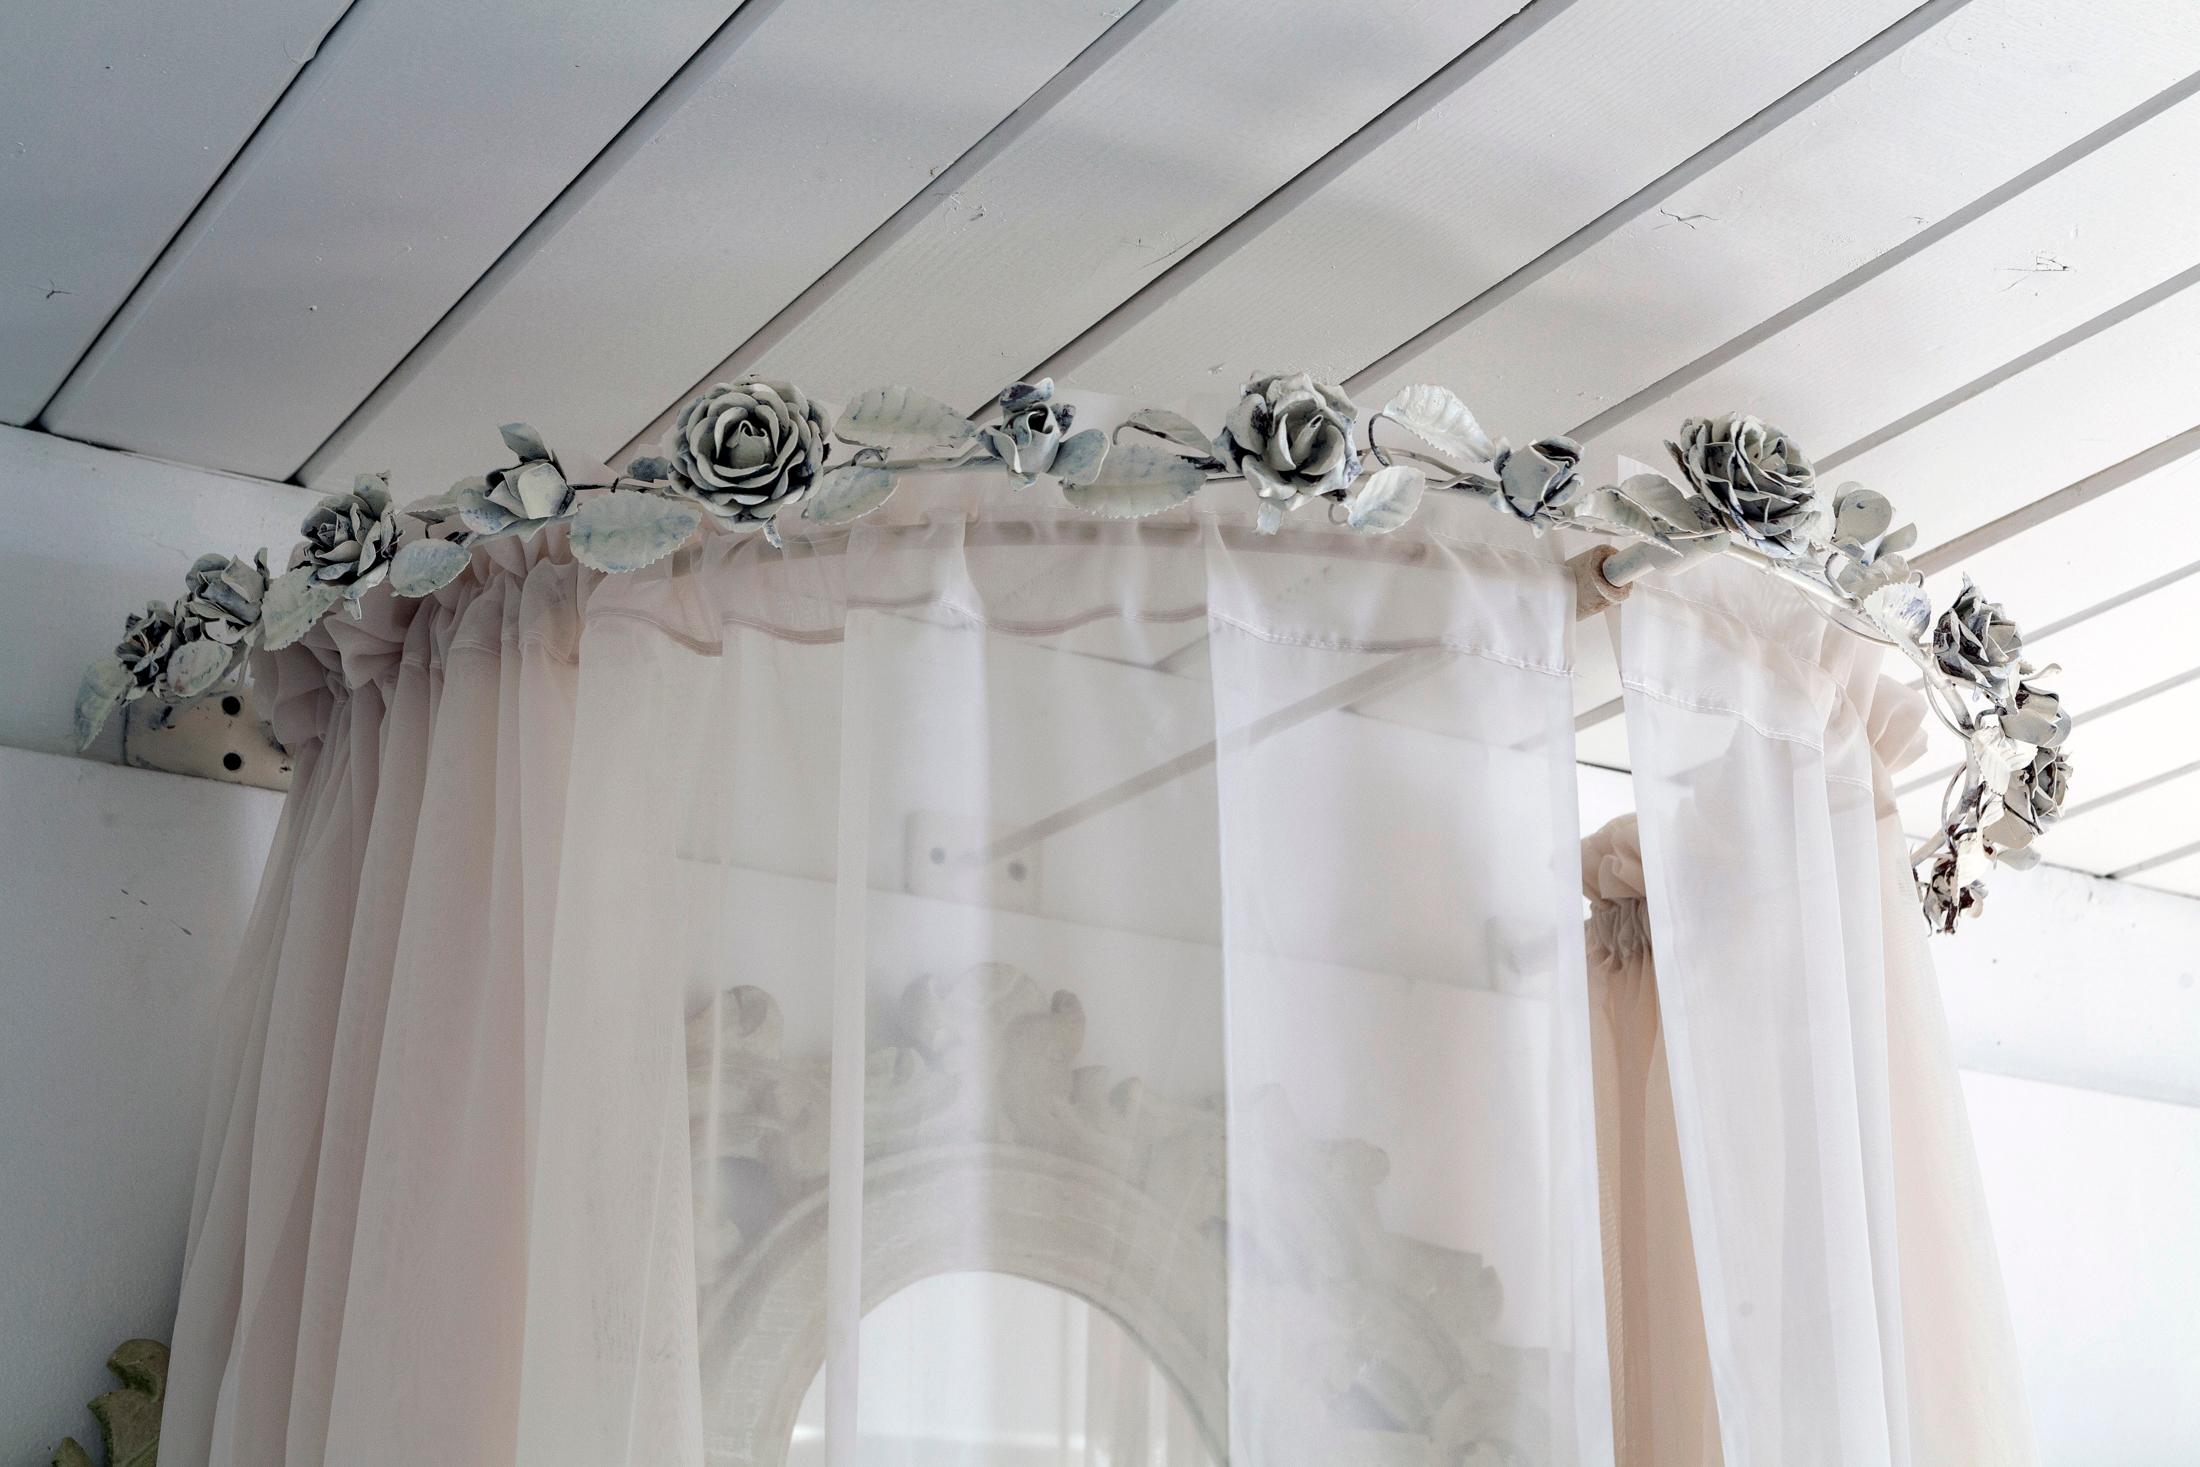 20th Century Handmade Iron Crown Header in Flowers & Leaves with Curtain Rod For Sale